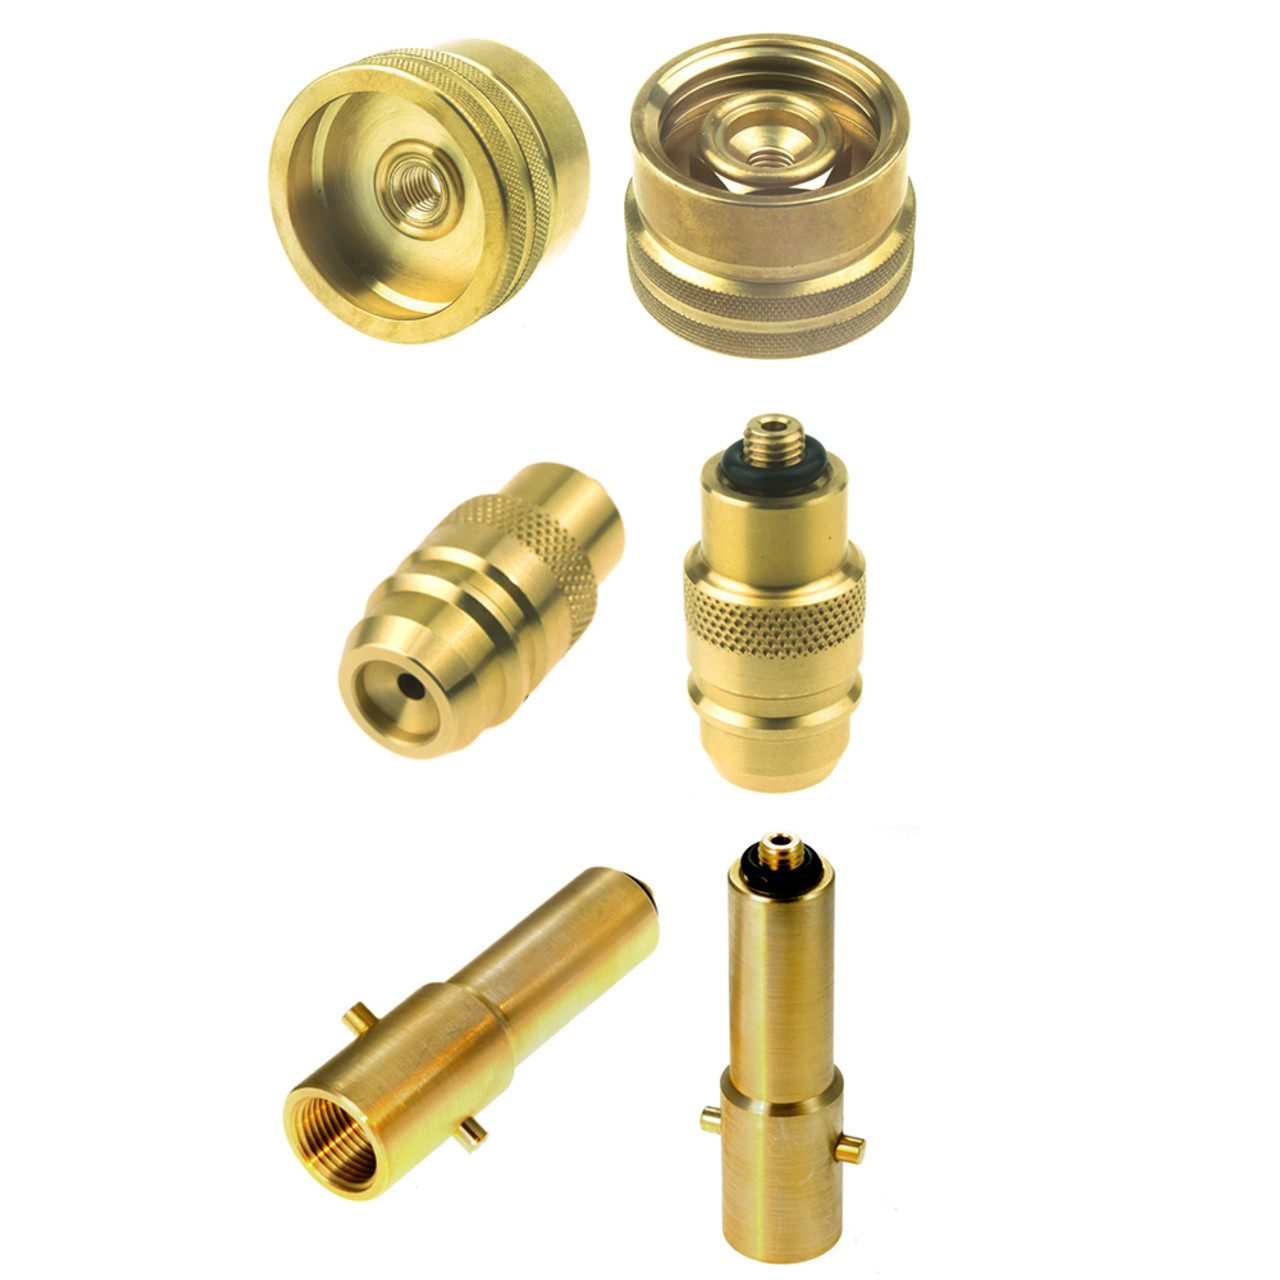 ACME to All Europe autogas refill Adapters Set